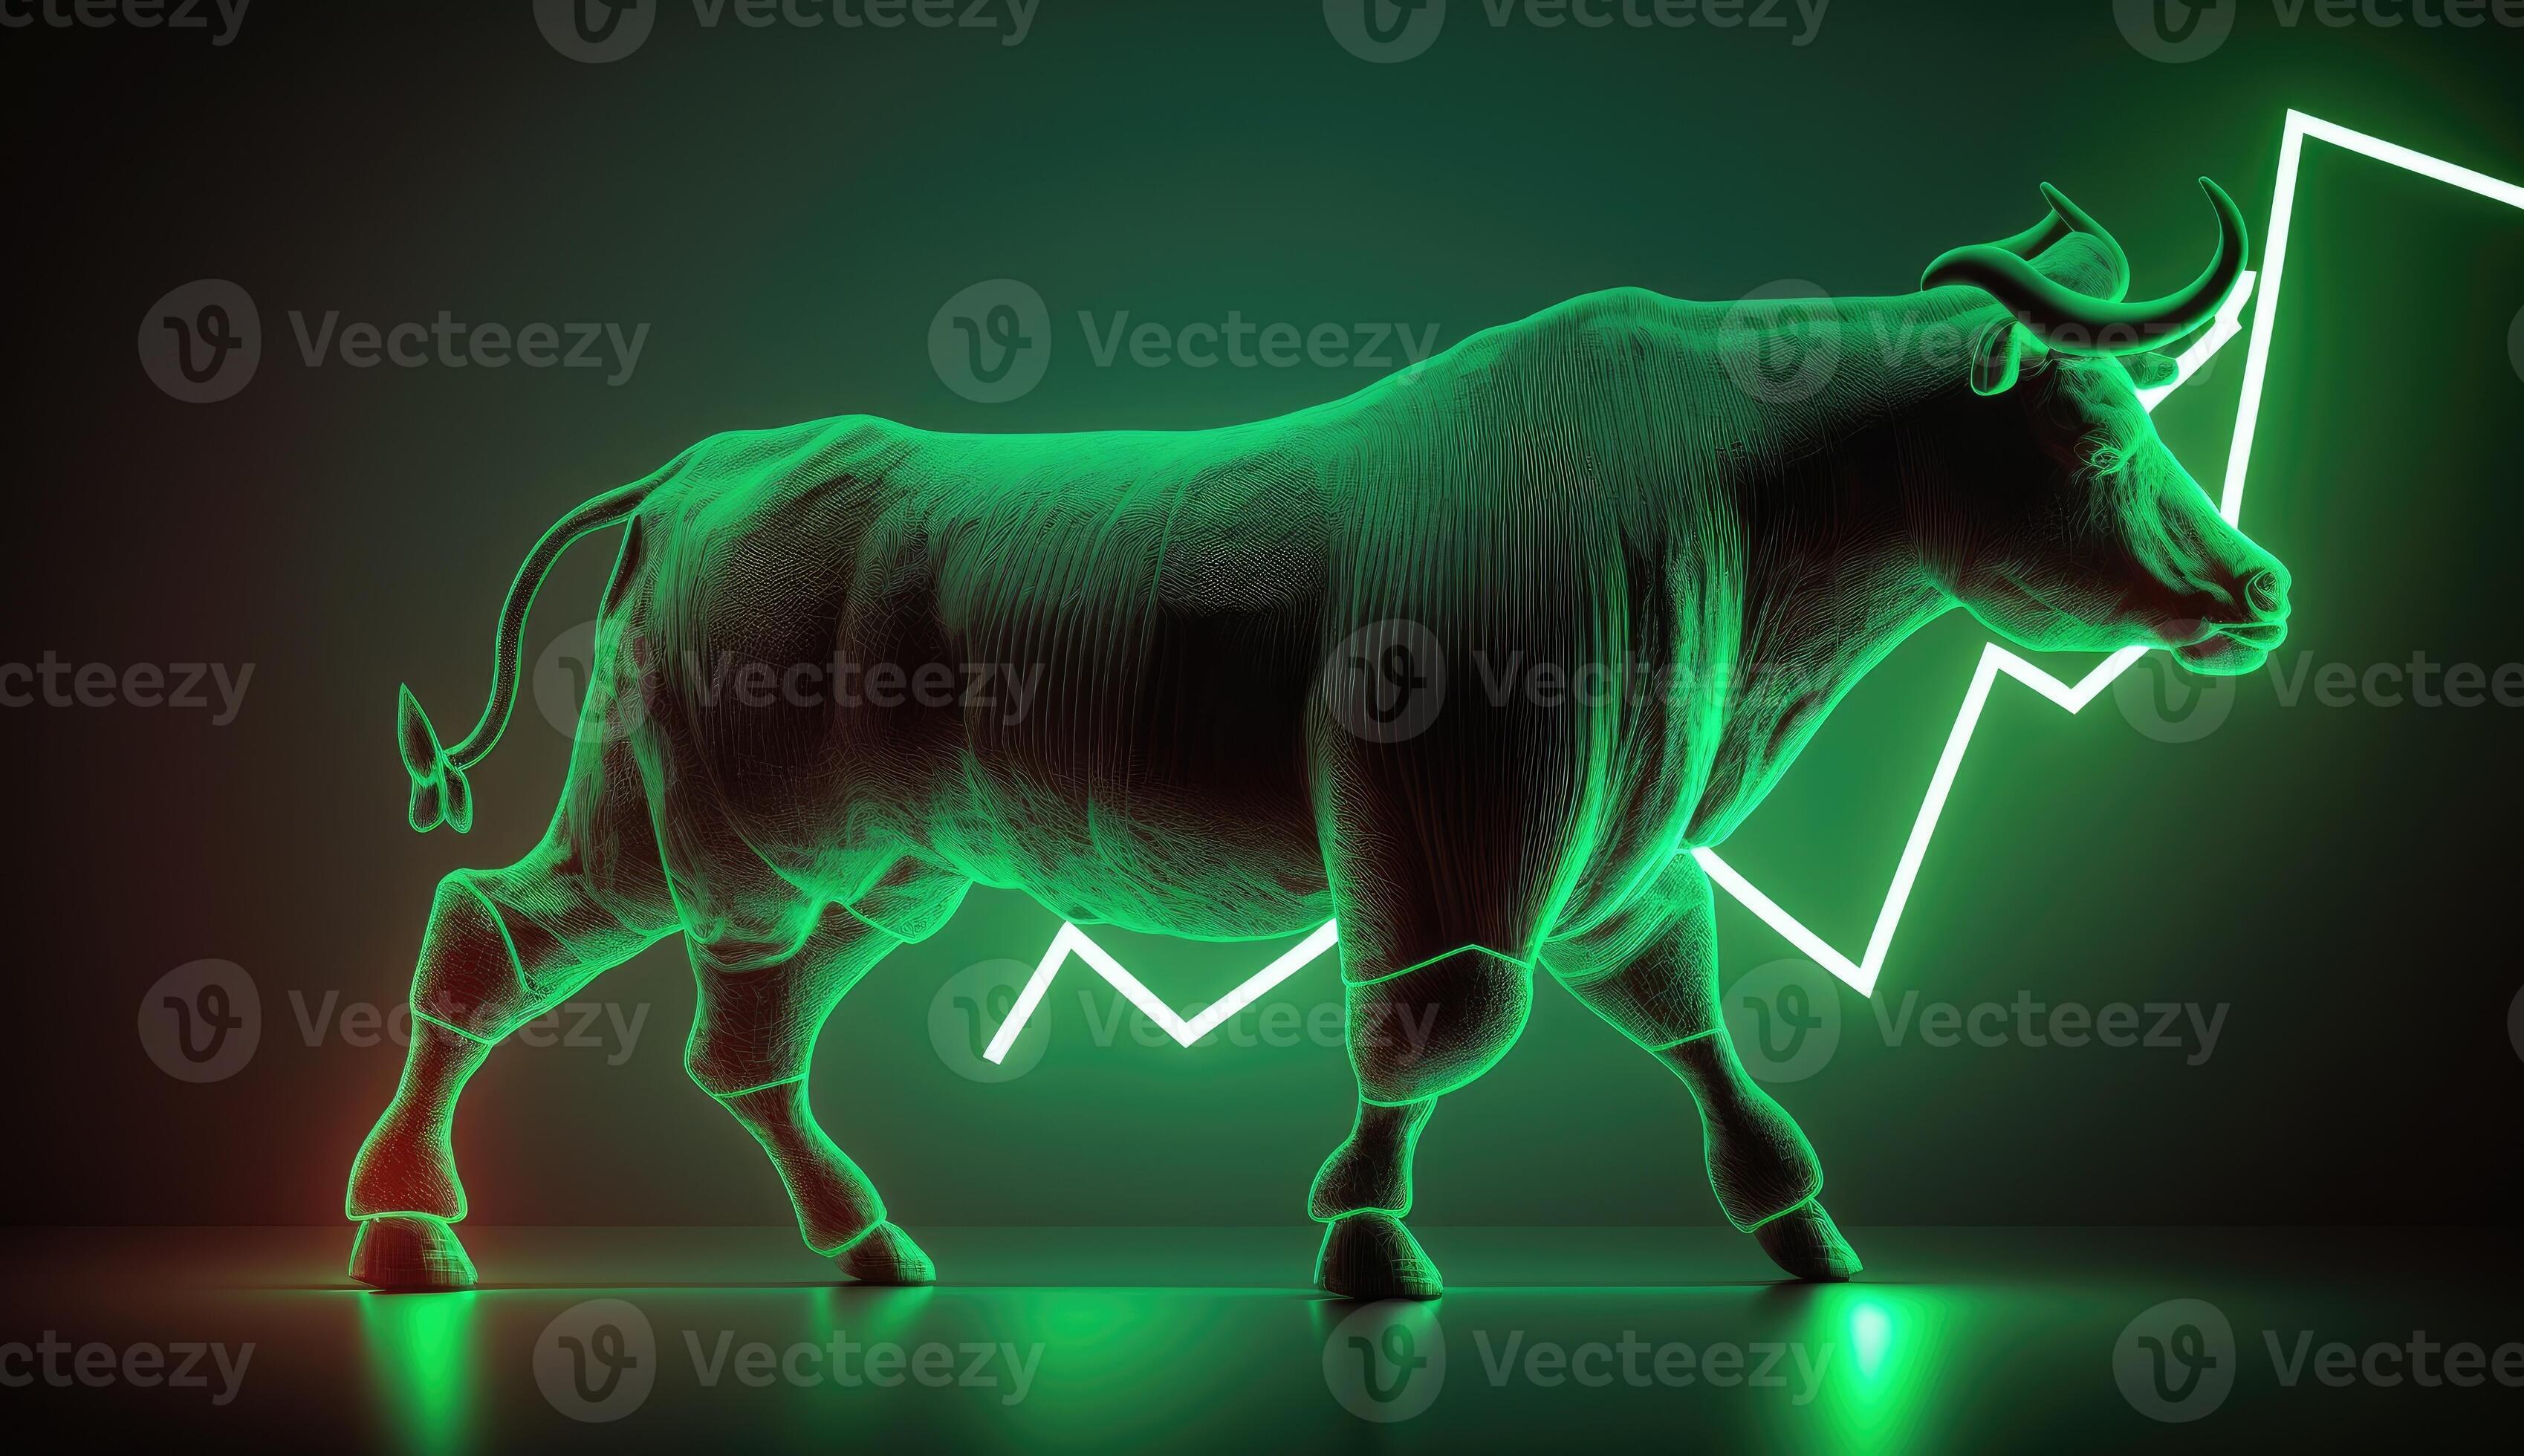 Bull Market Stock Photos and Images - 123RF